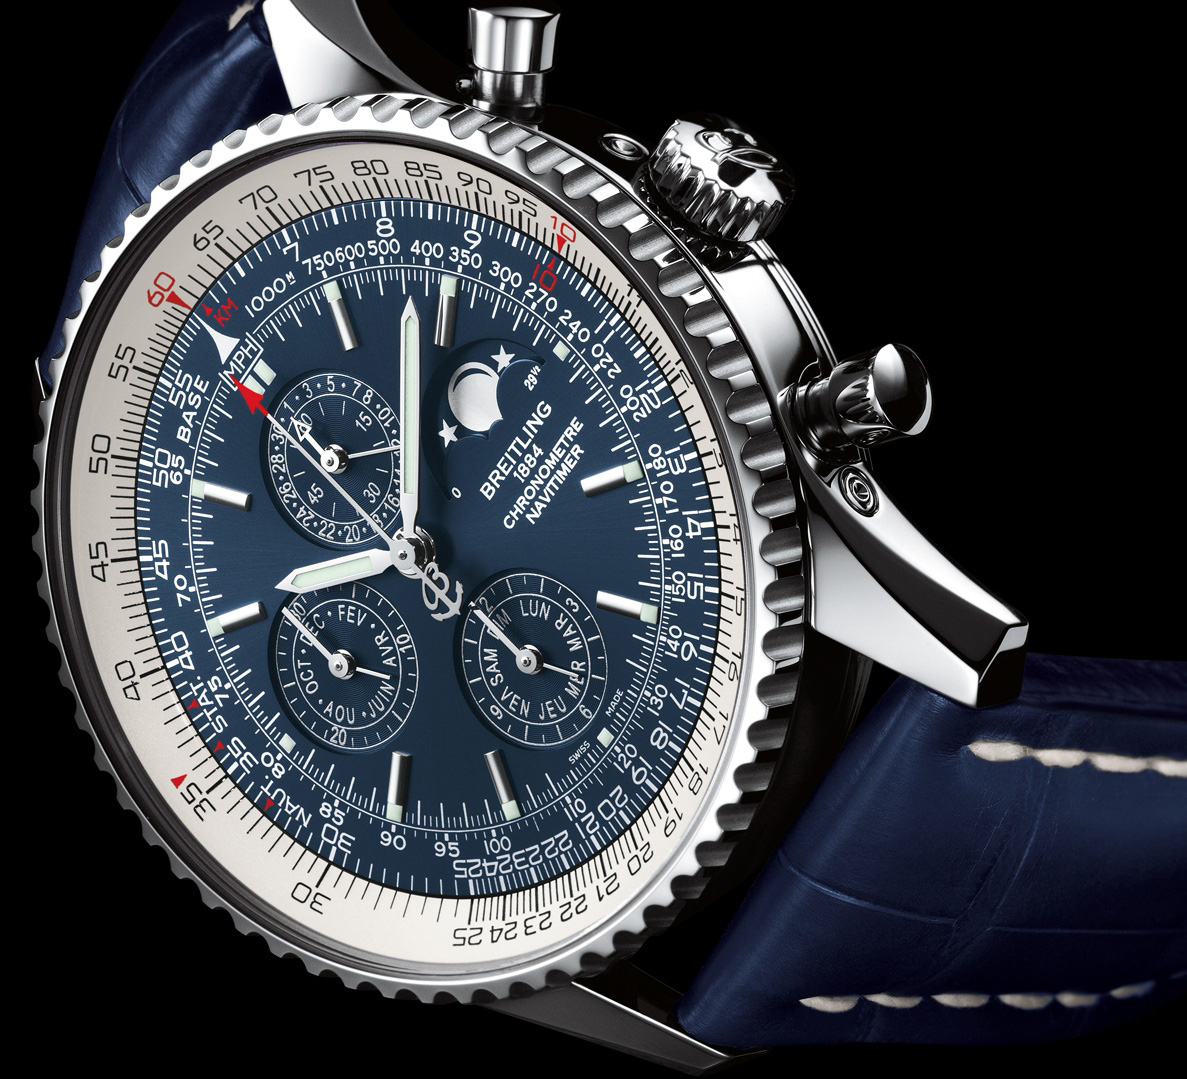 Breitling Shoots for the Moon with the TransOcean Chronograph 1461